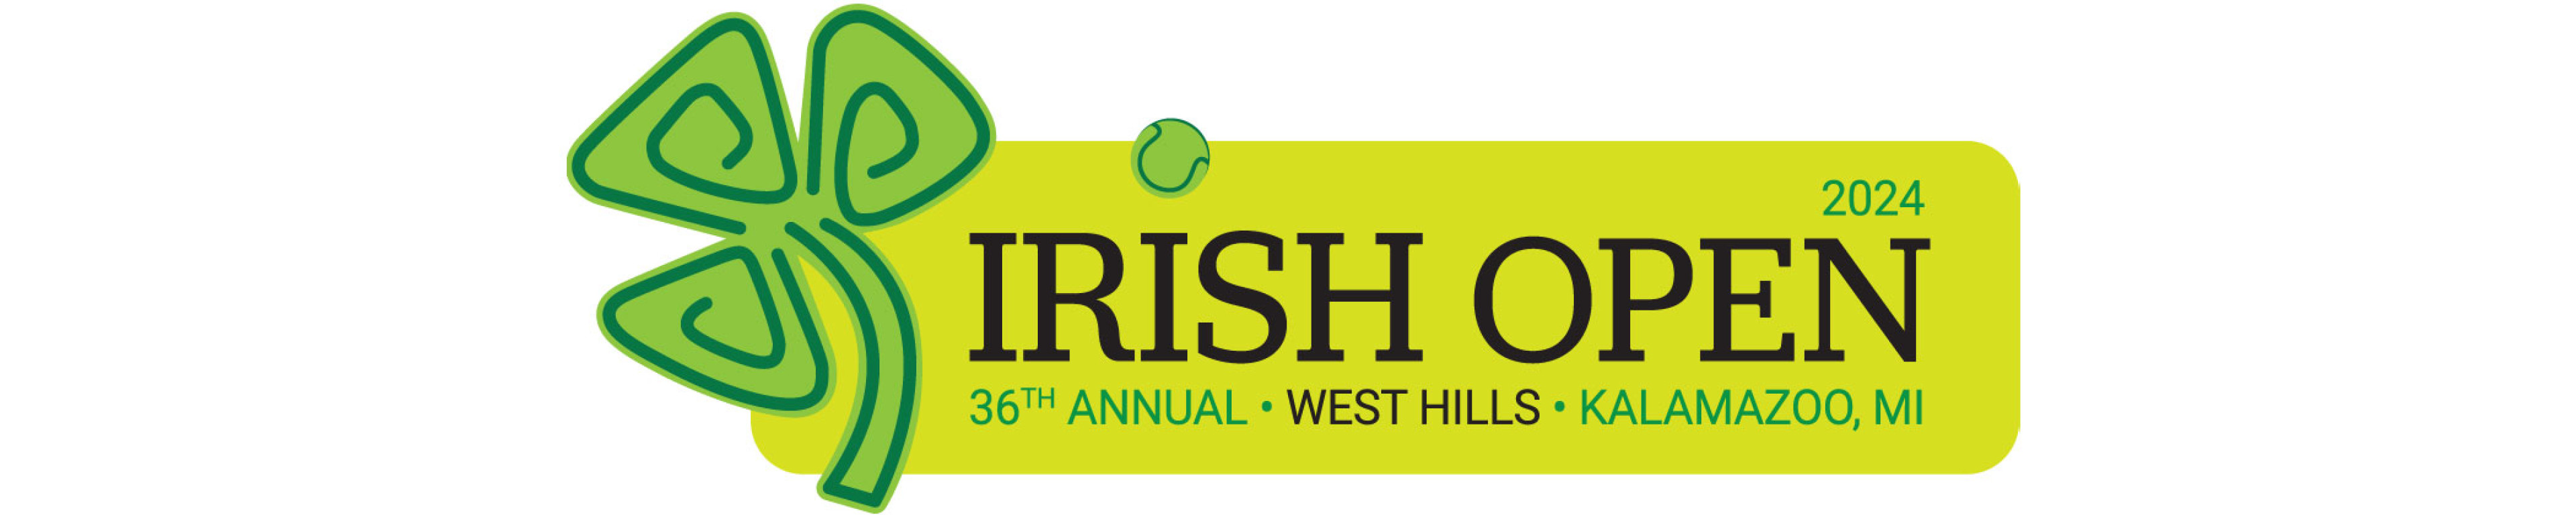 Irish Open Logo with a clover leaf and wording